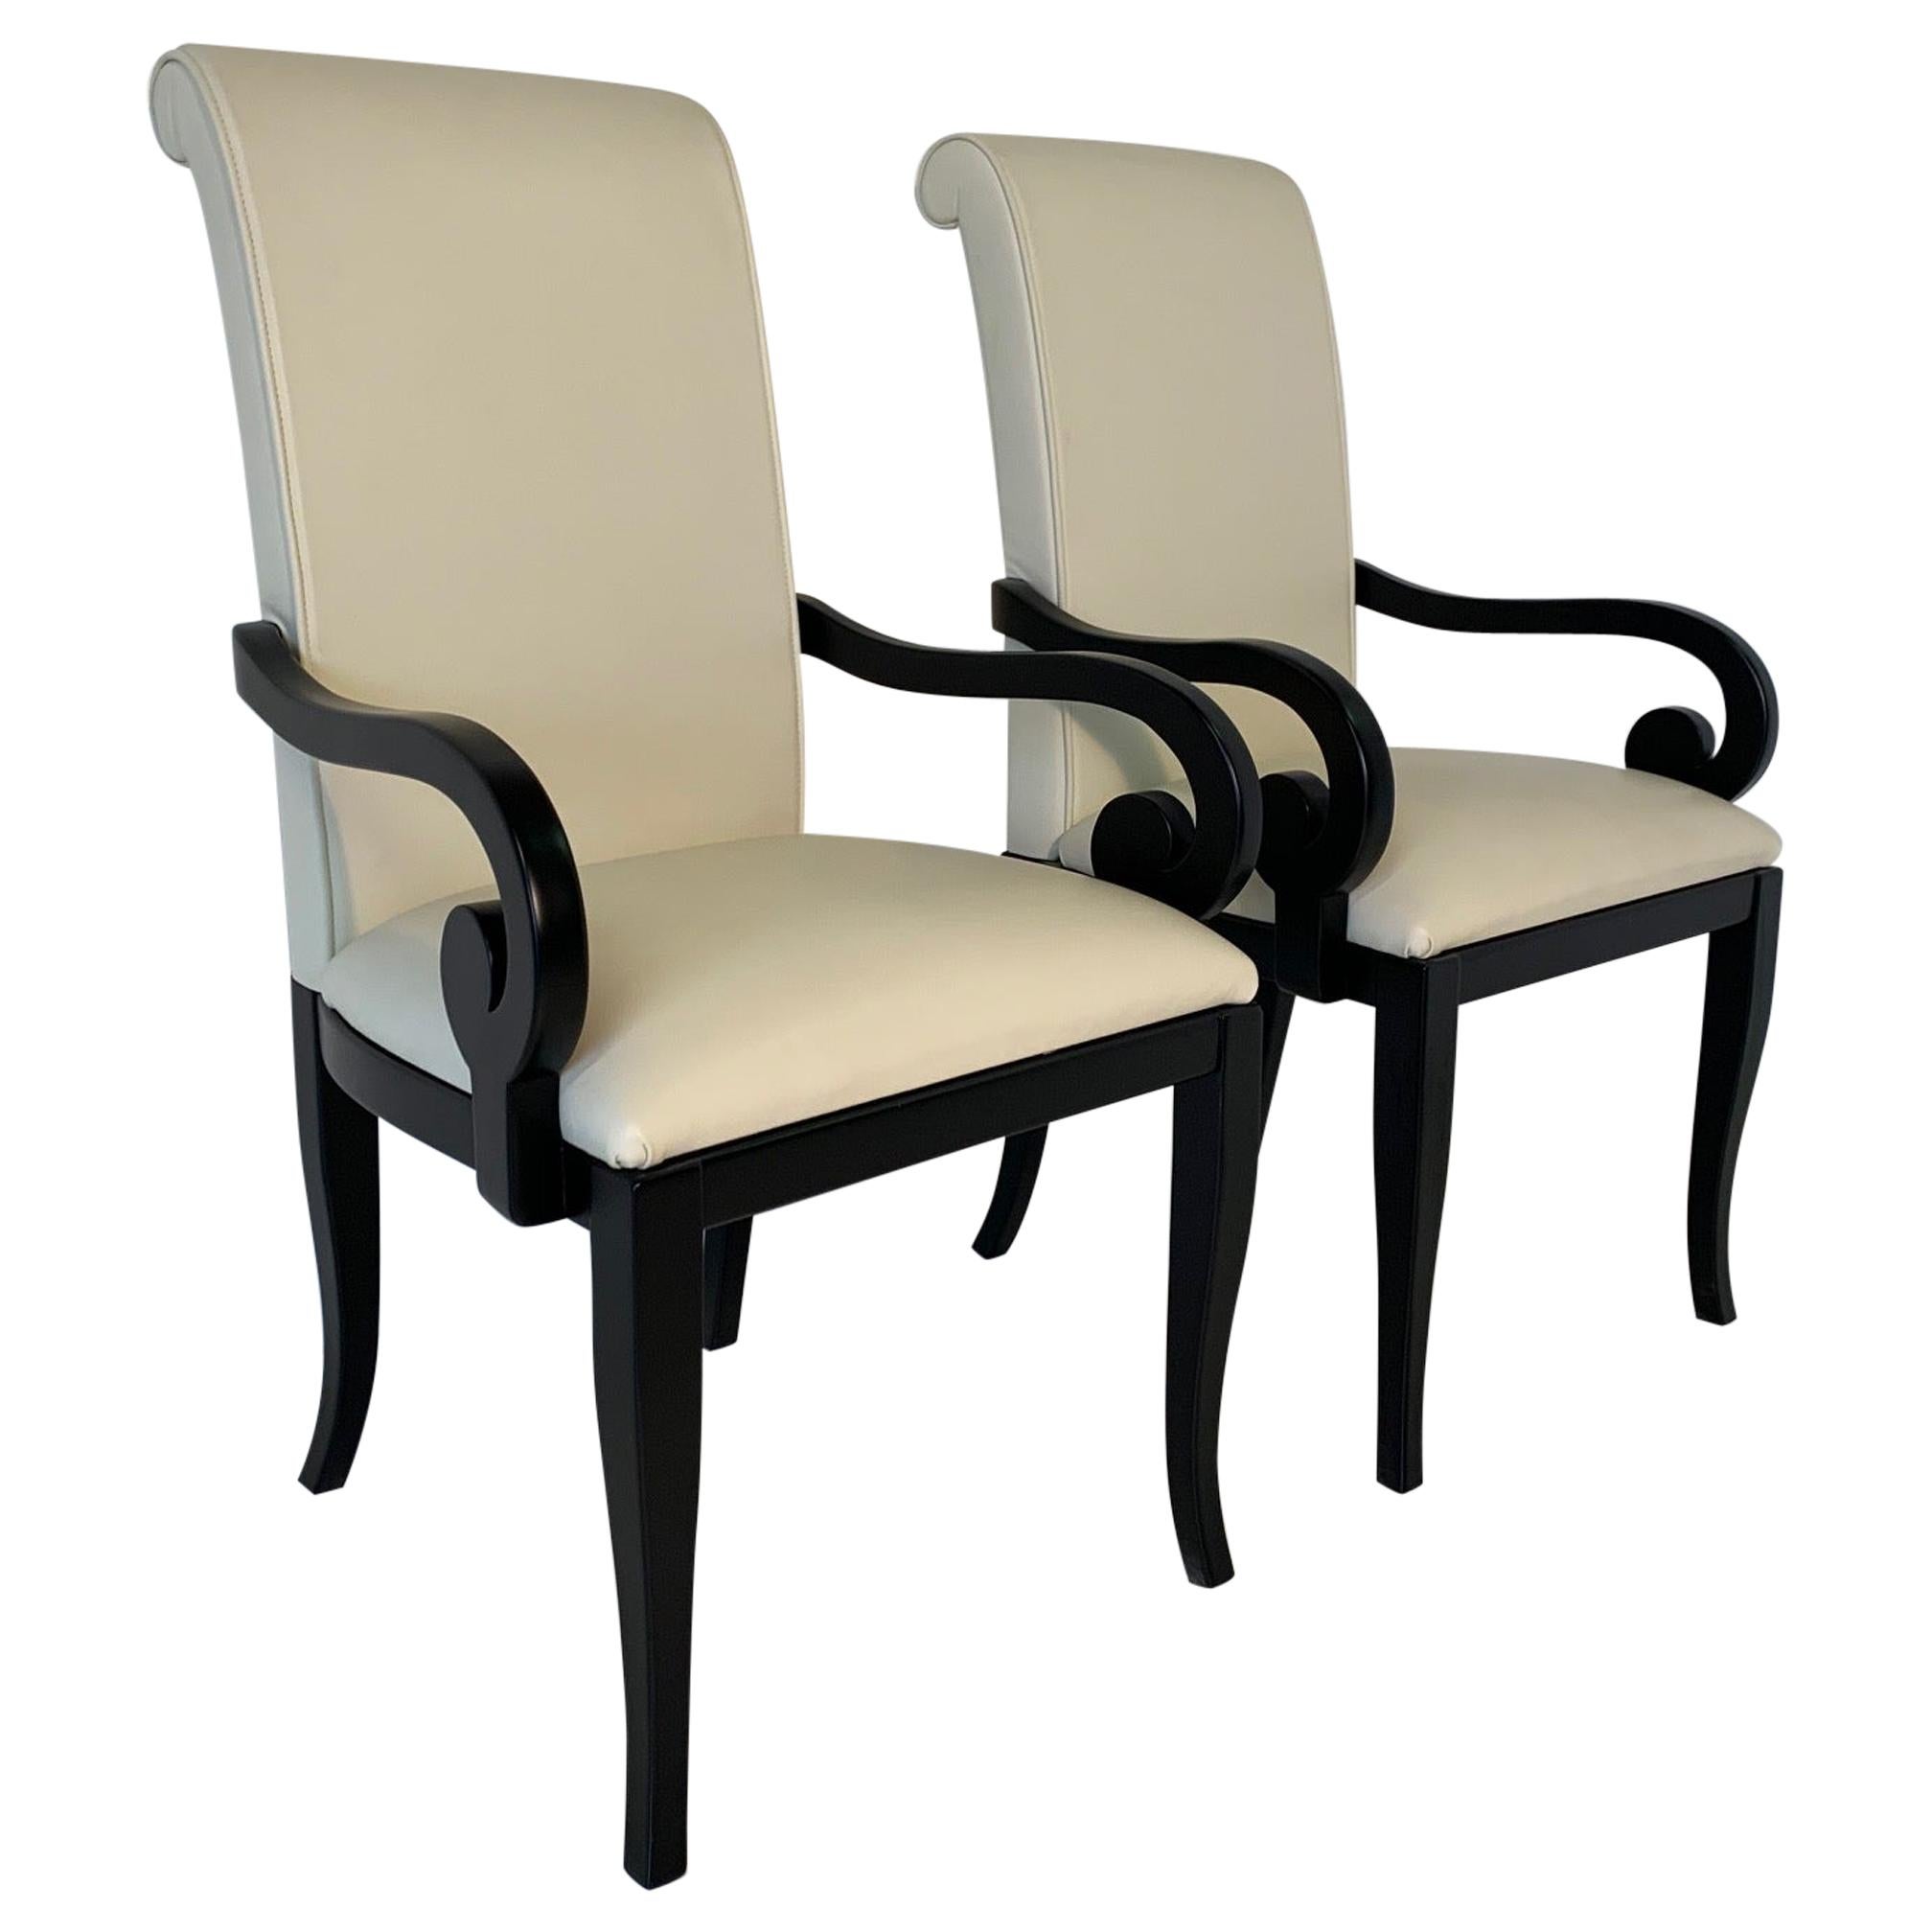 Pair of Italian Art Deco Black and White Chairs with Armrest